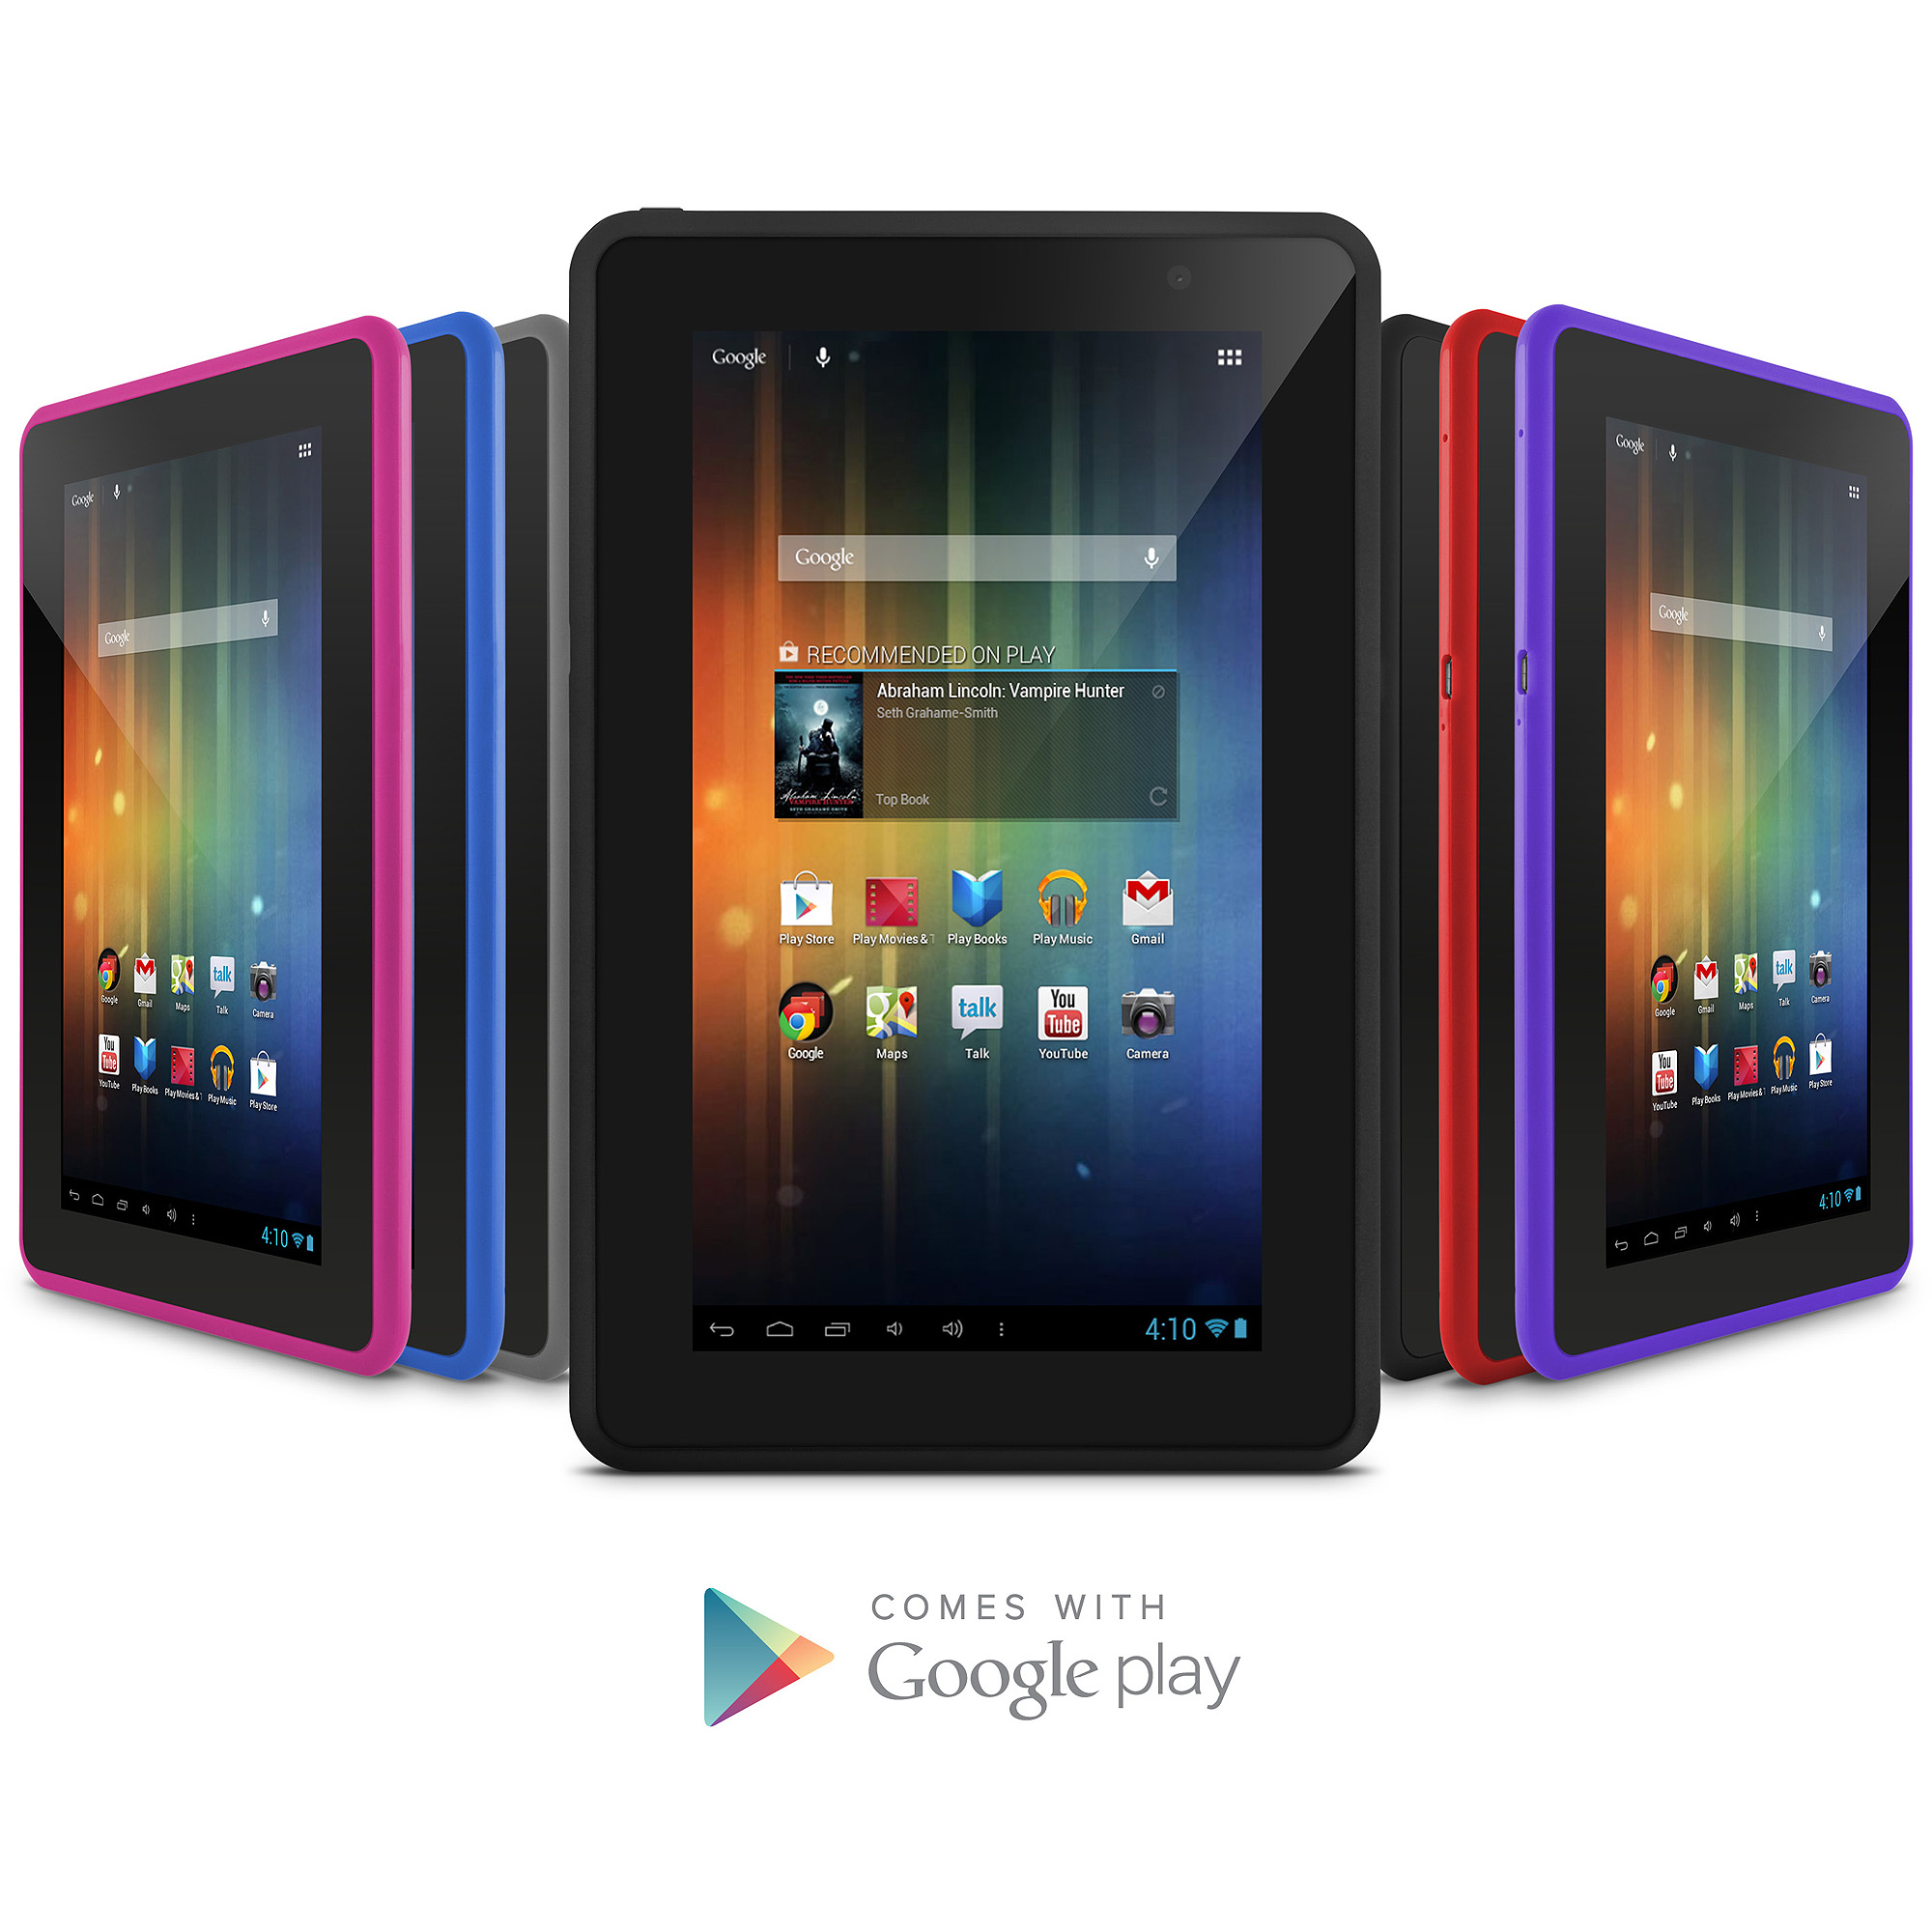 Ematic 7" Tablet with 4GB Memory and Google Mobile Services - image 1 of 4